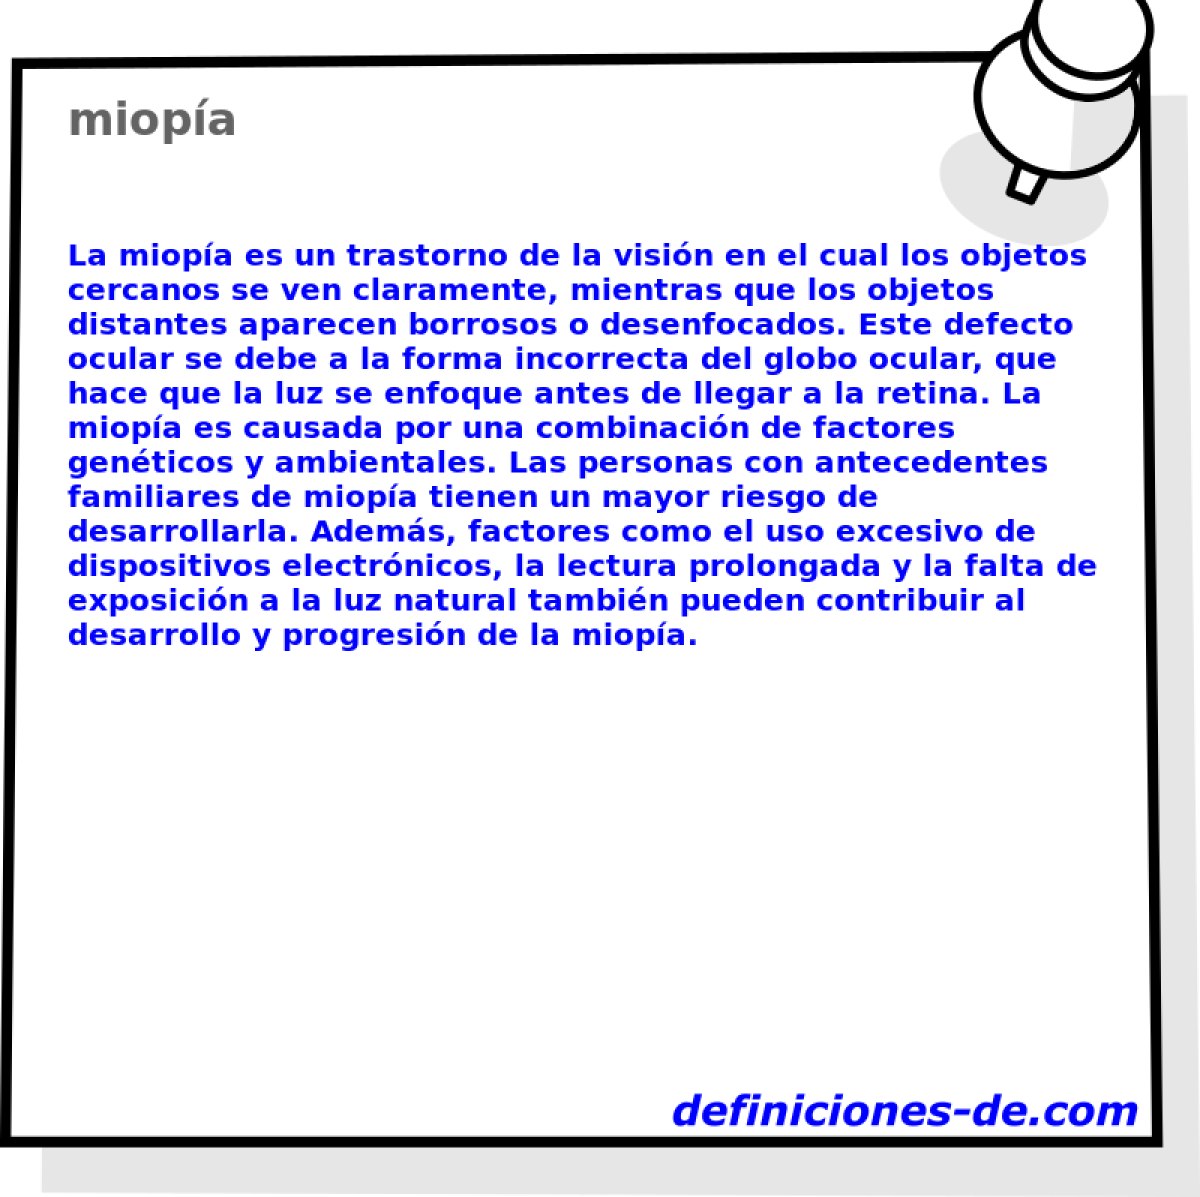 miopa 